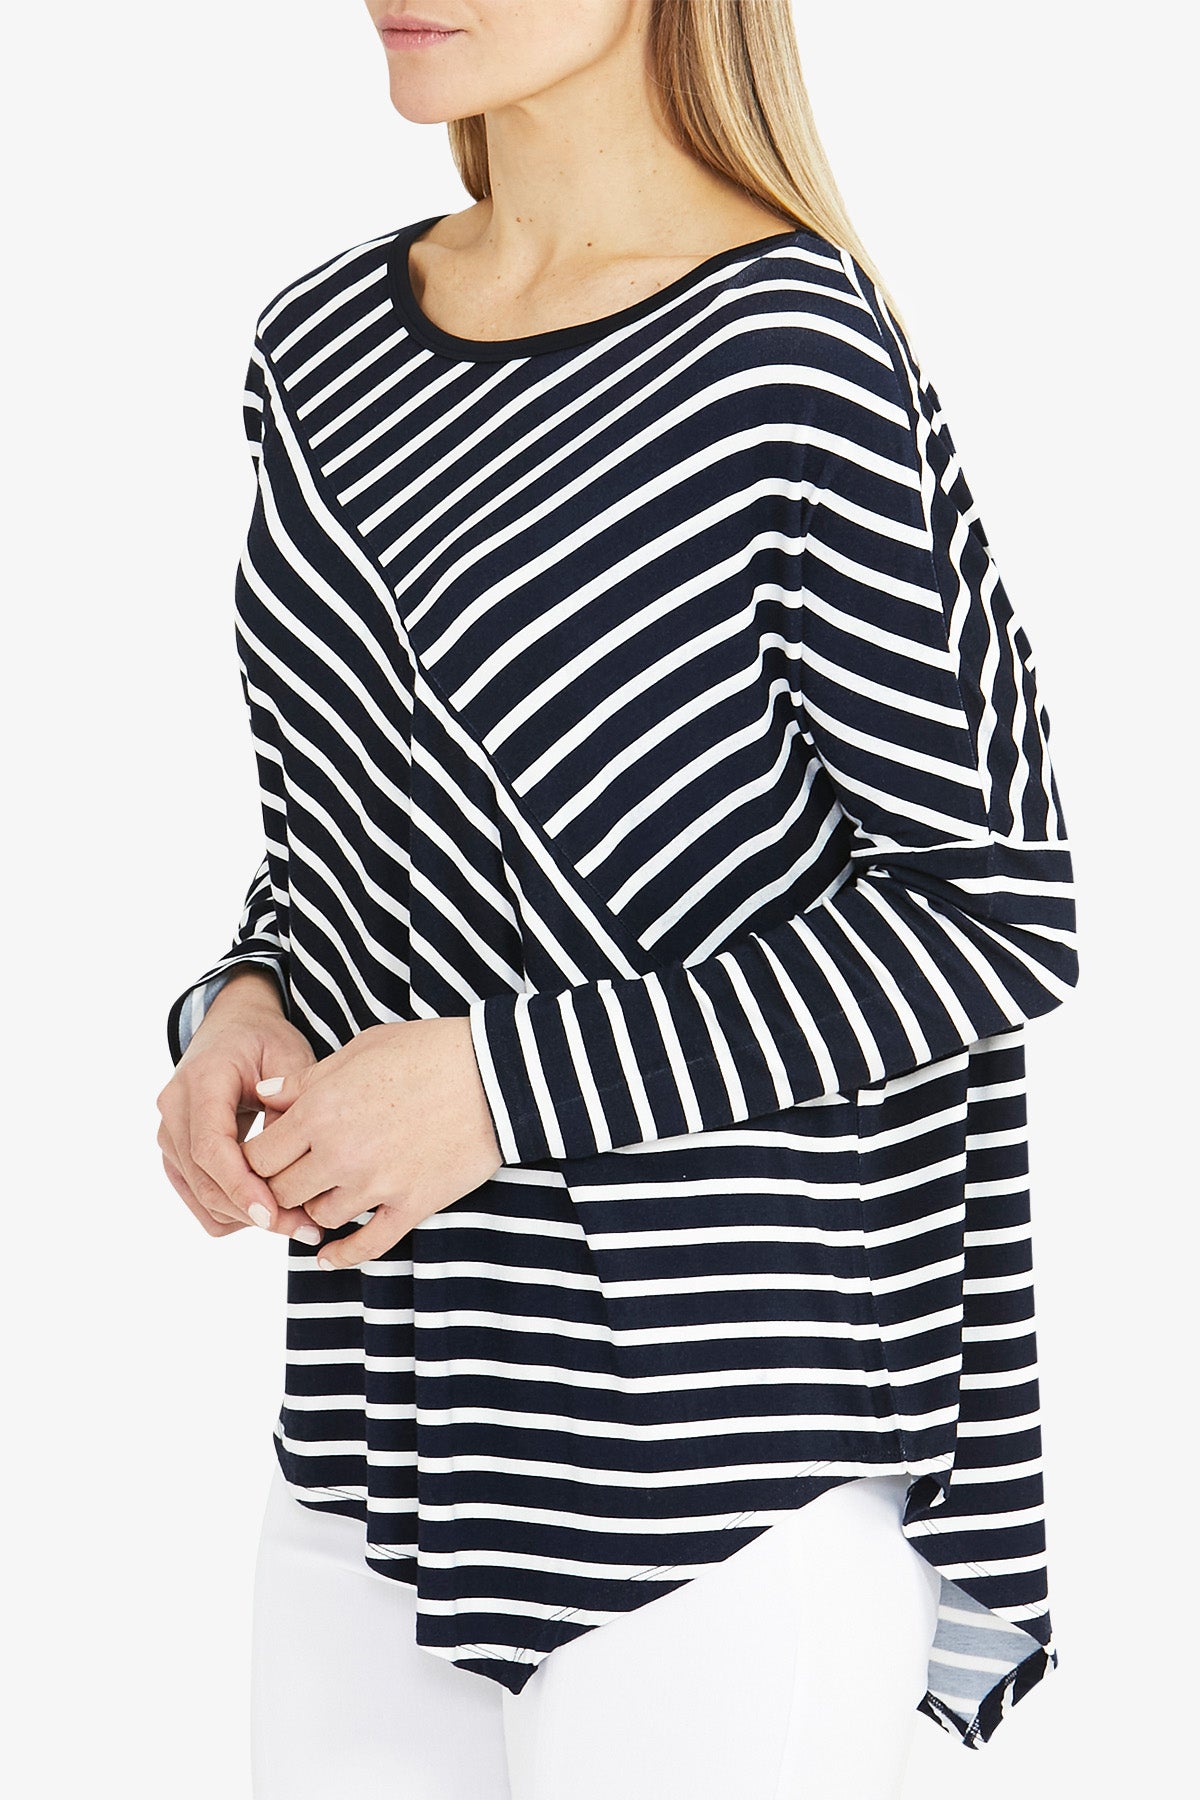 Asymmetrical Stripe Top Navy and Ivory